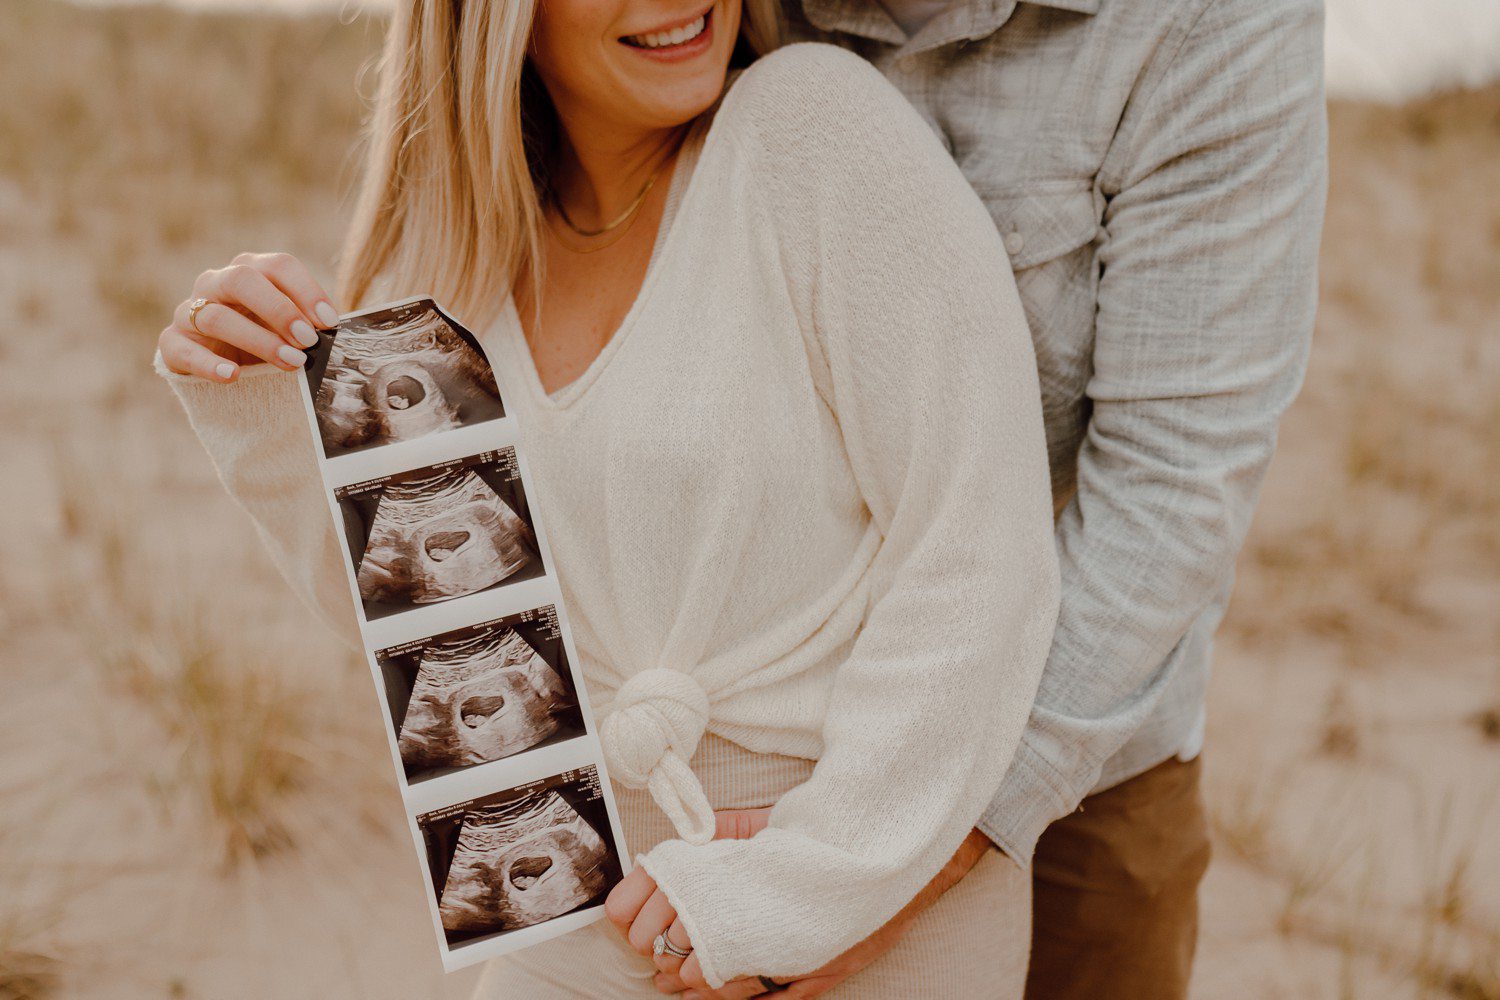 Pregnancy announcement photos with sonogram on the beach